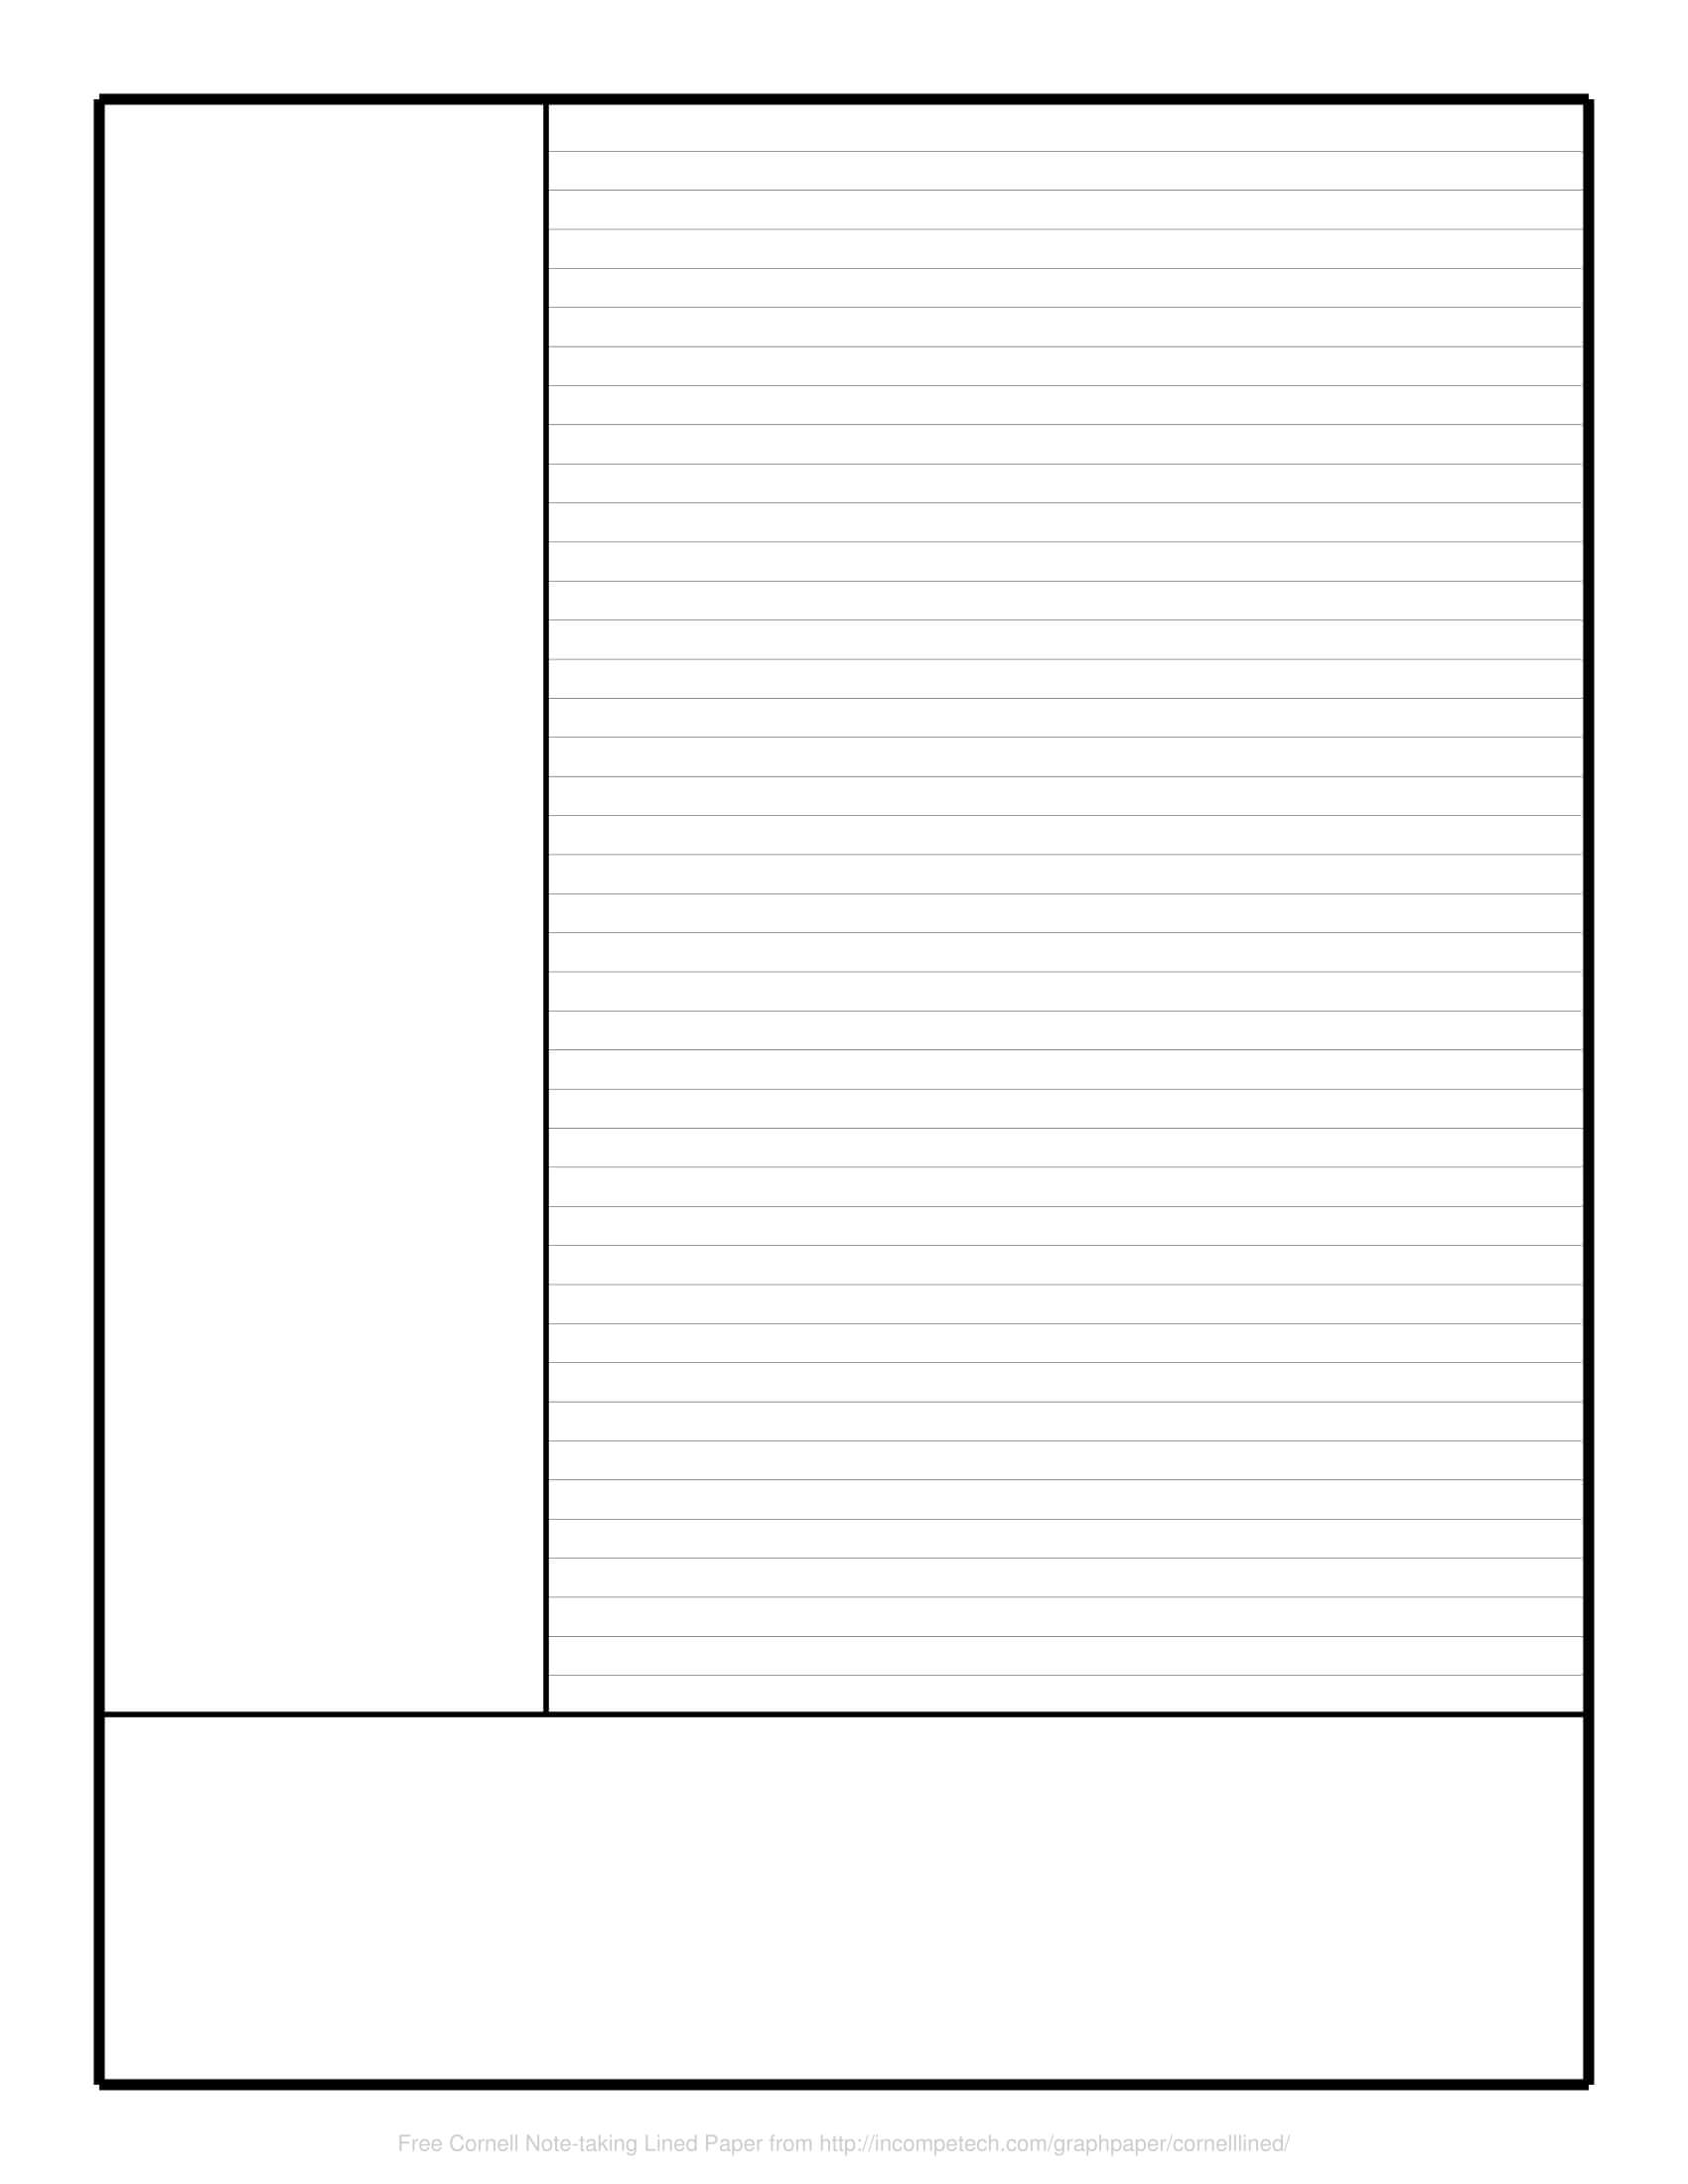 008-cornell-notes-template-download-1920x2636-within-within-cornell-note-template-word-best